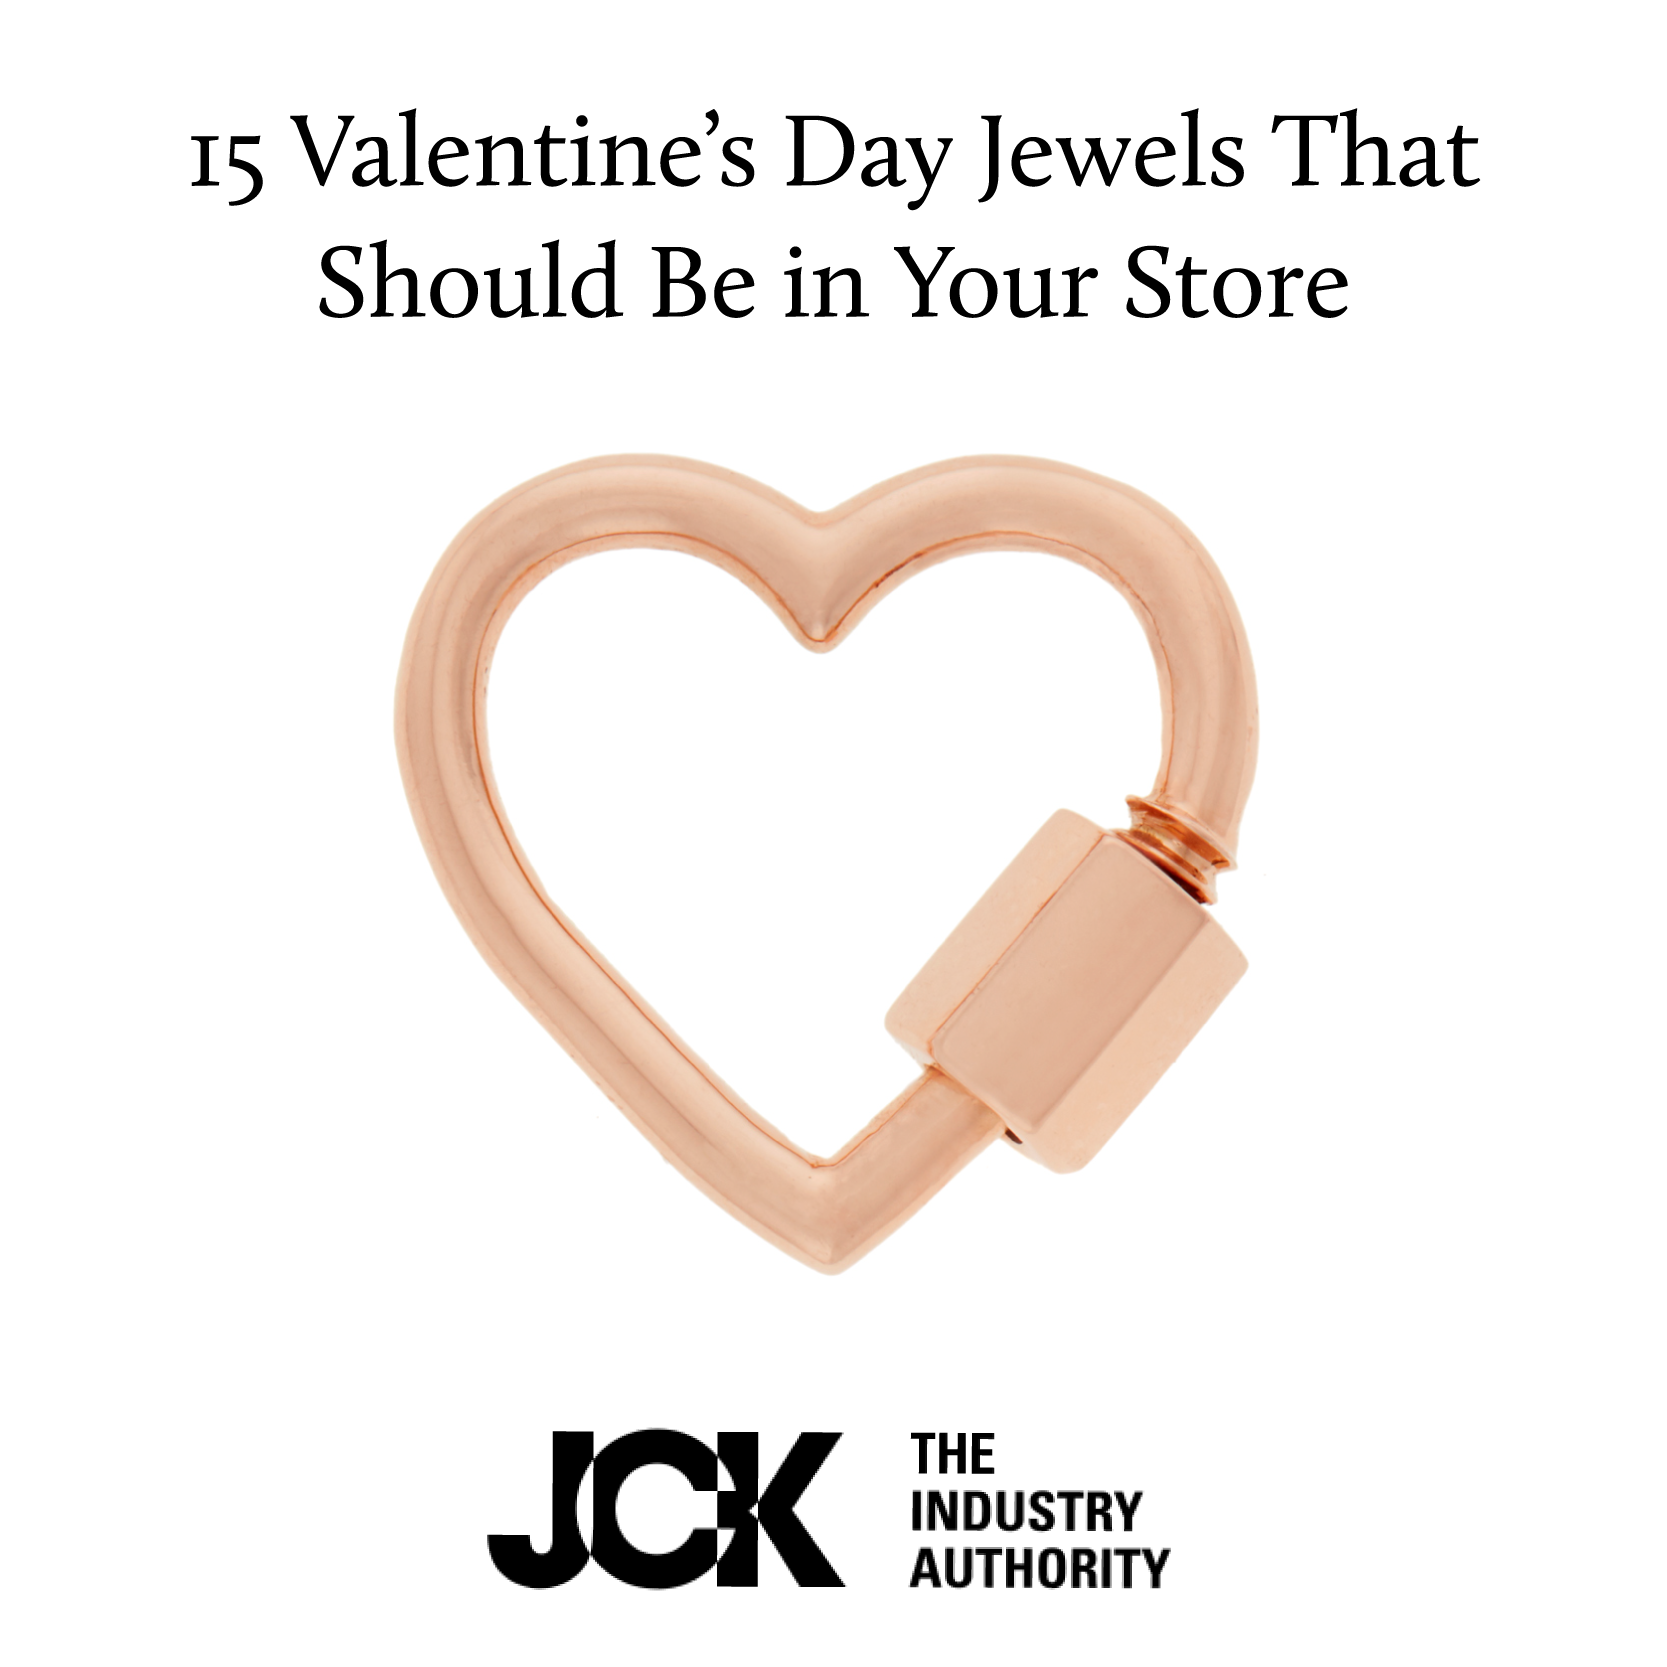 JCK: 15 Valentine’s Day Jewels That Should Be in Your Store